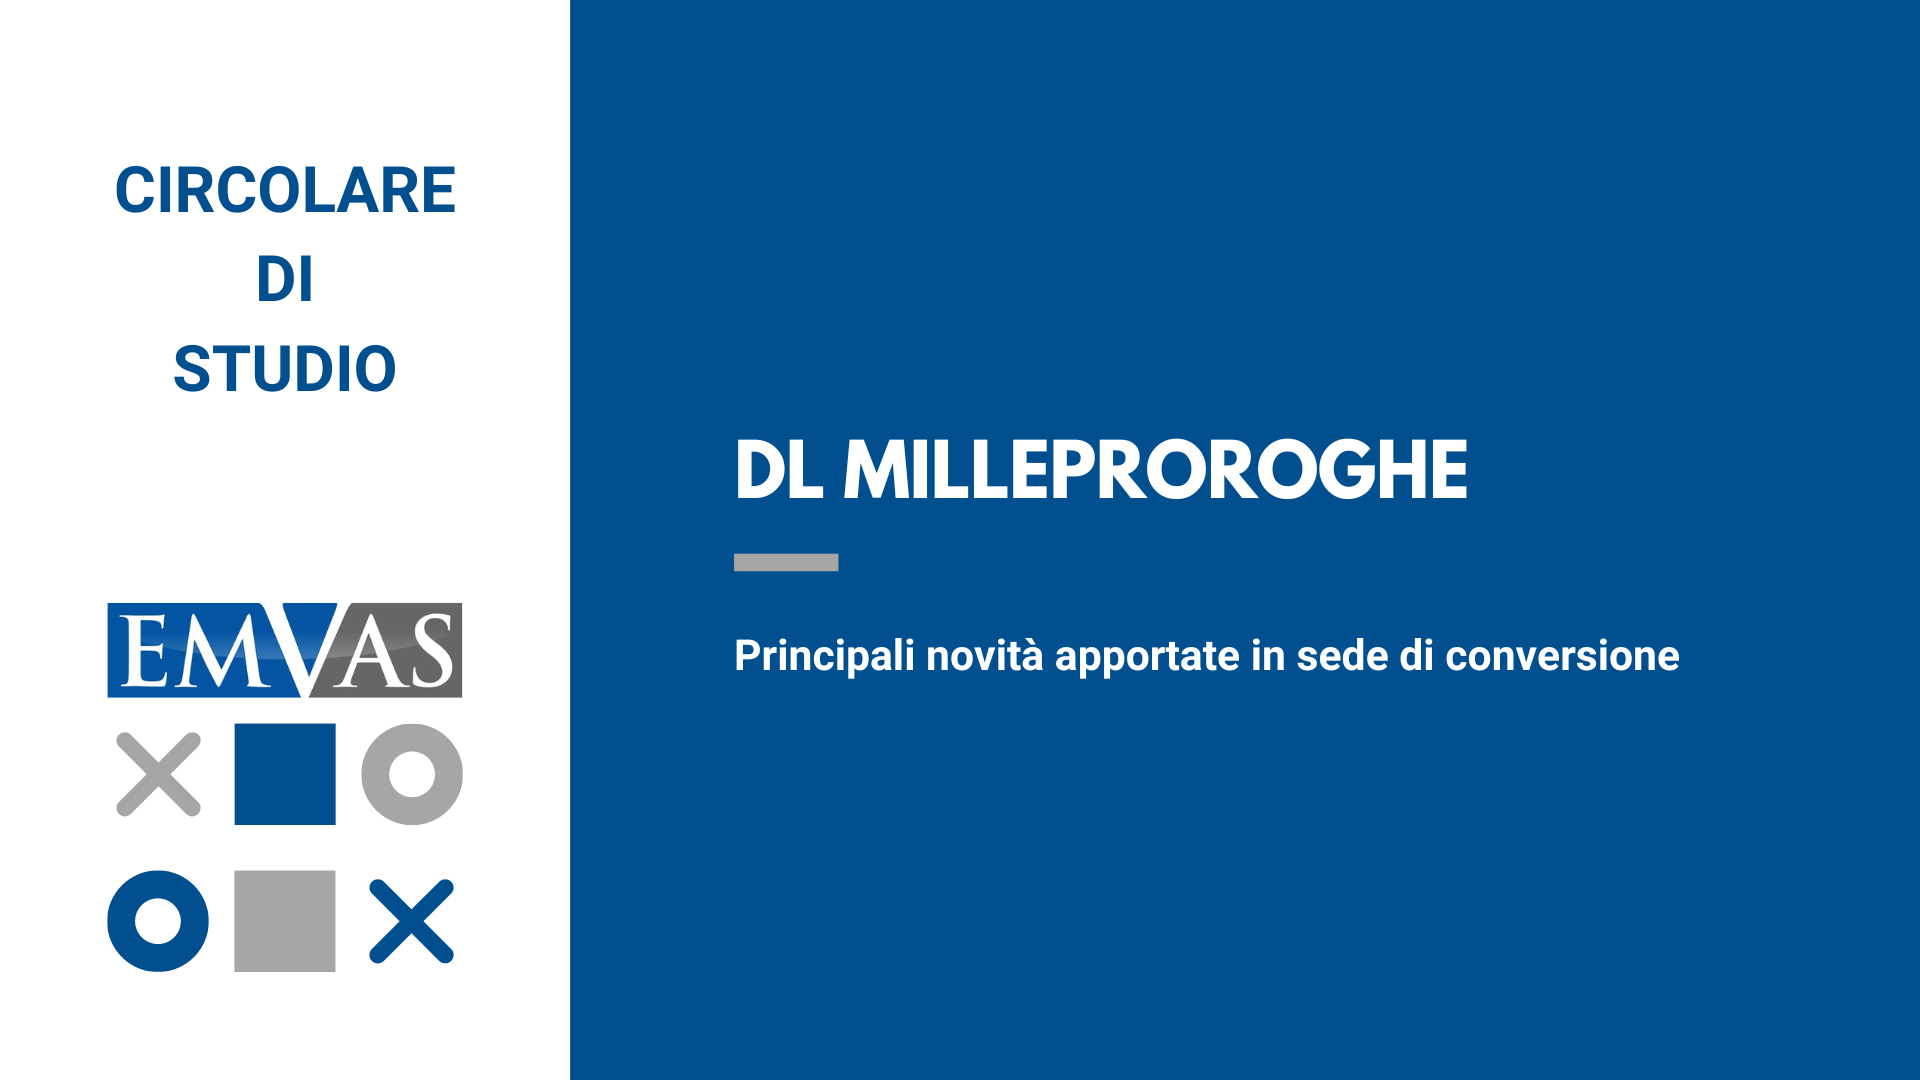 MILLEPROROGHE